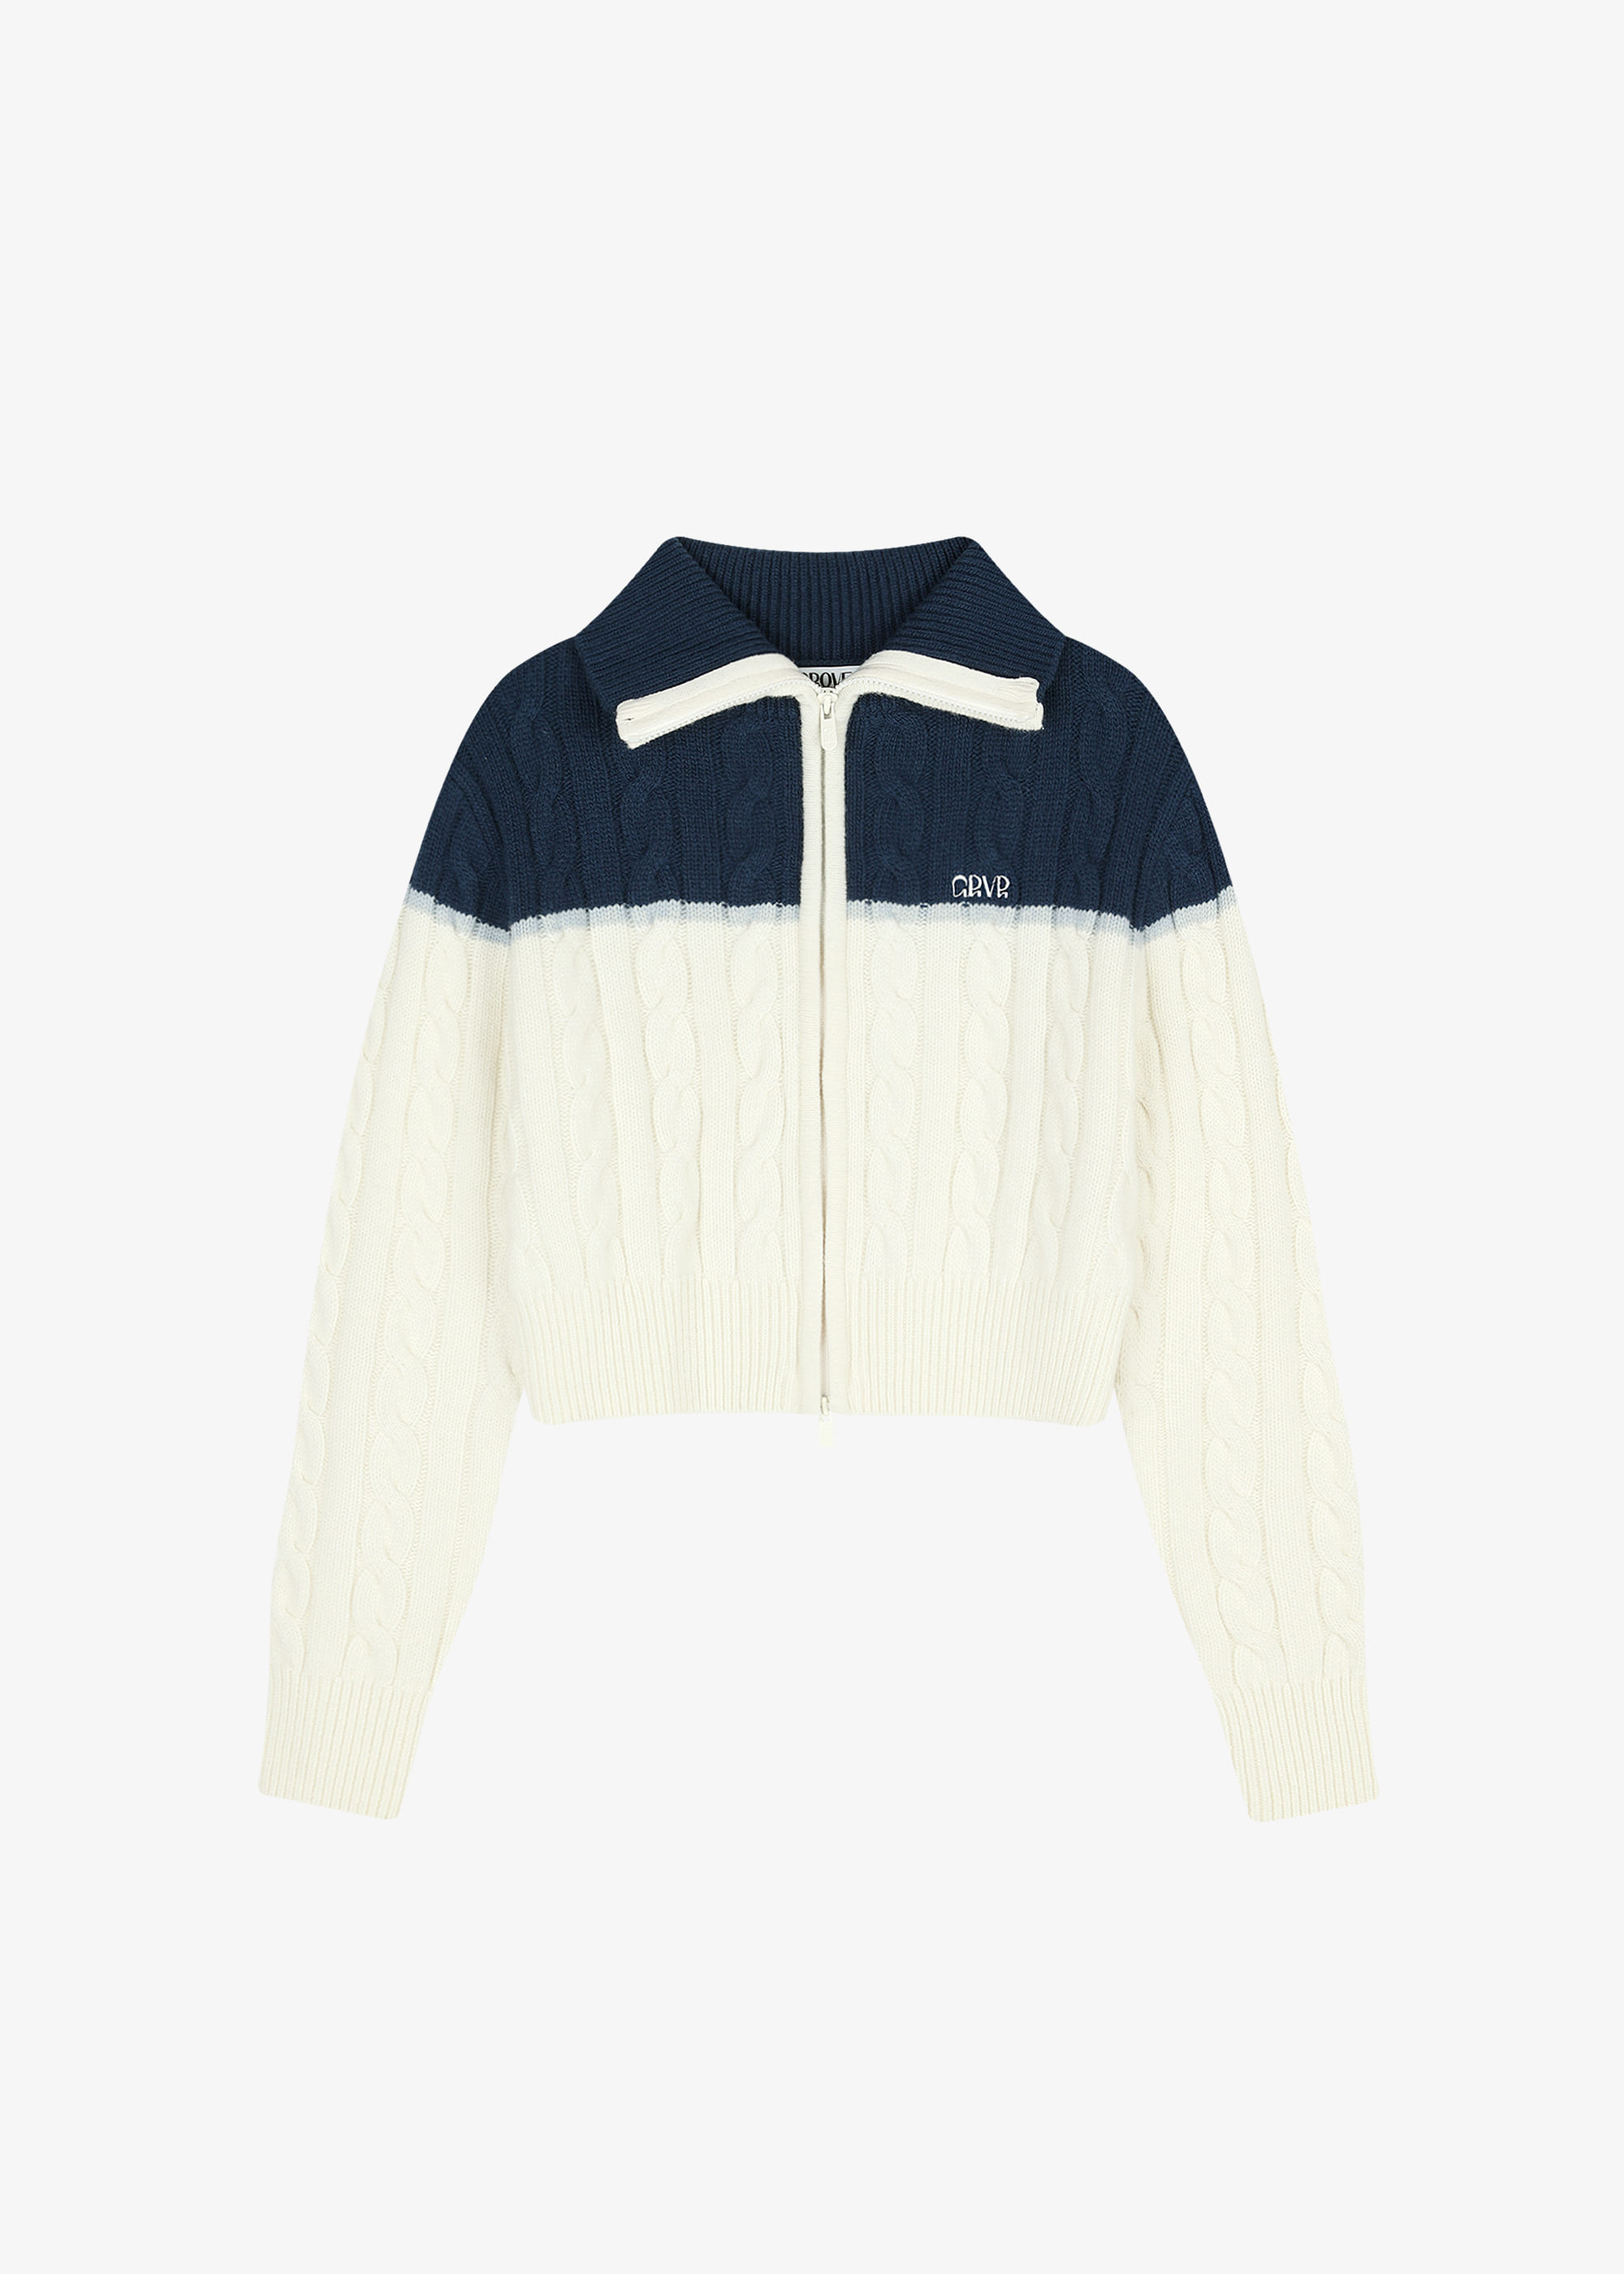 22F/W JAY KNIT ZIP-UP [3COLOR]